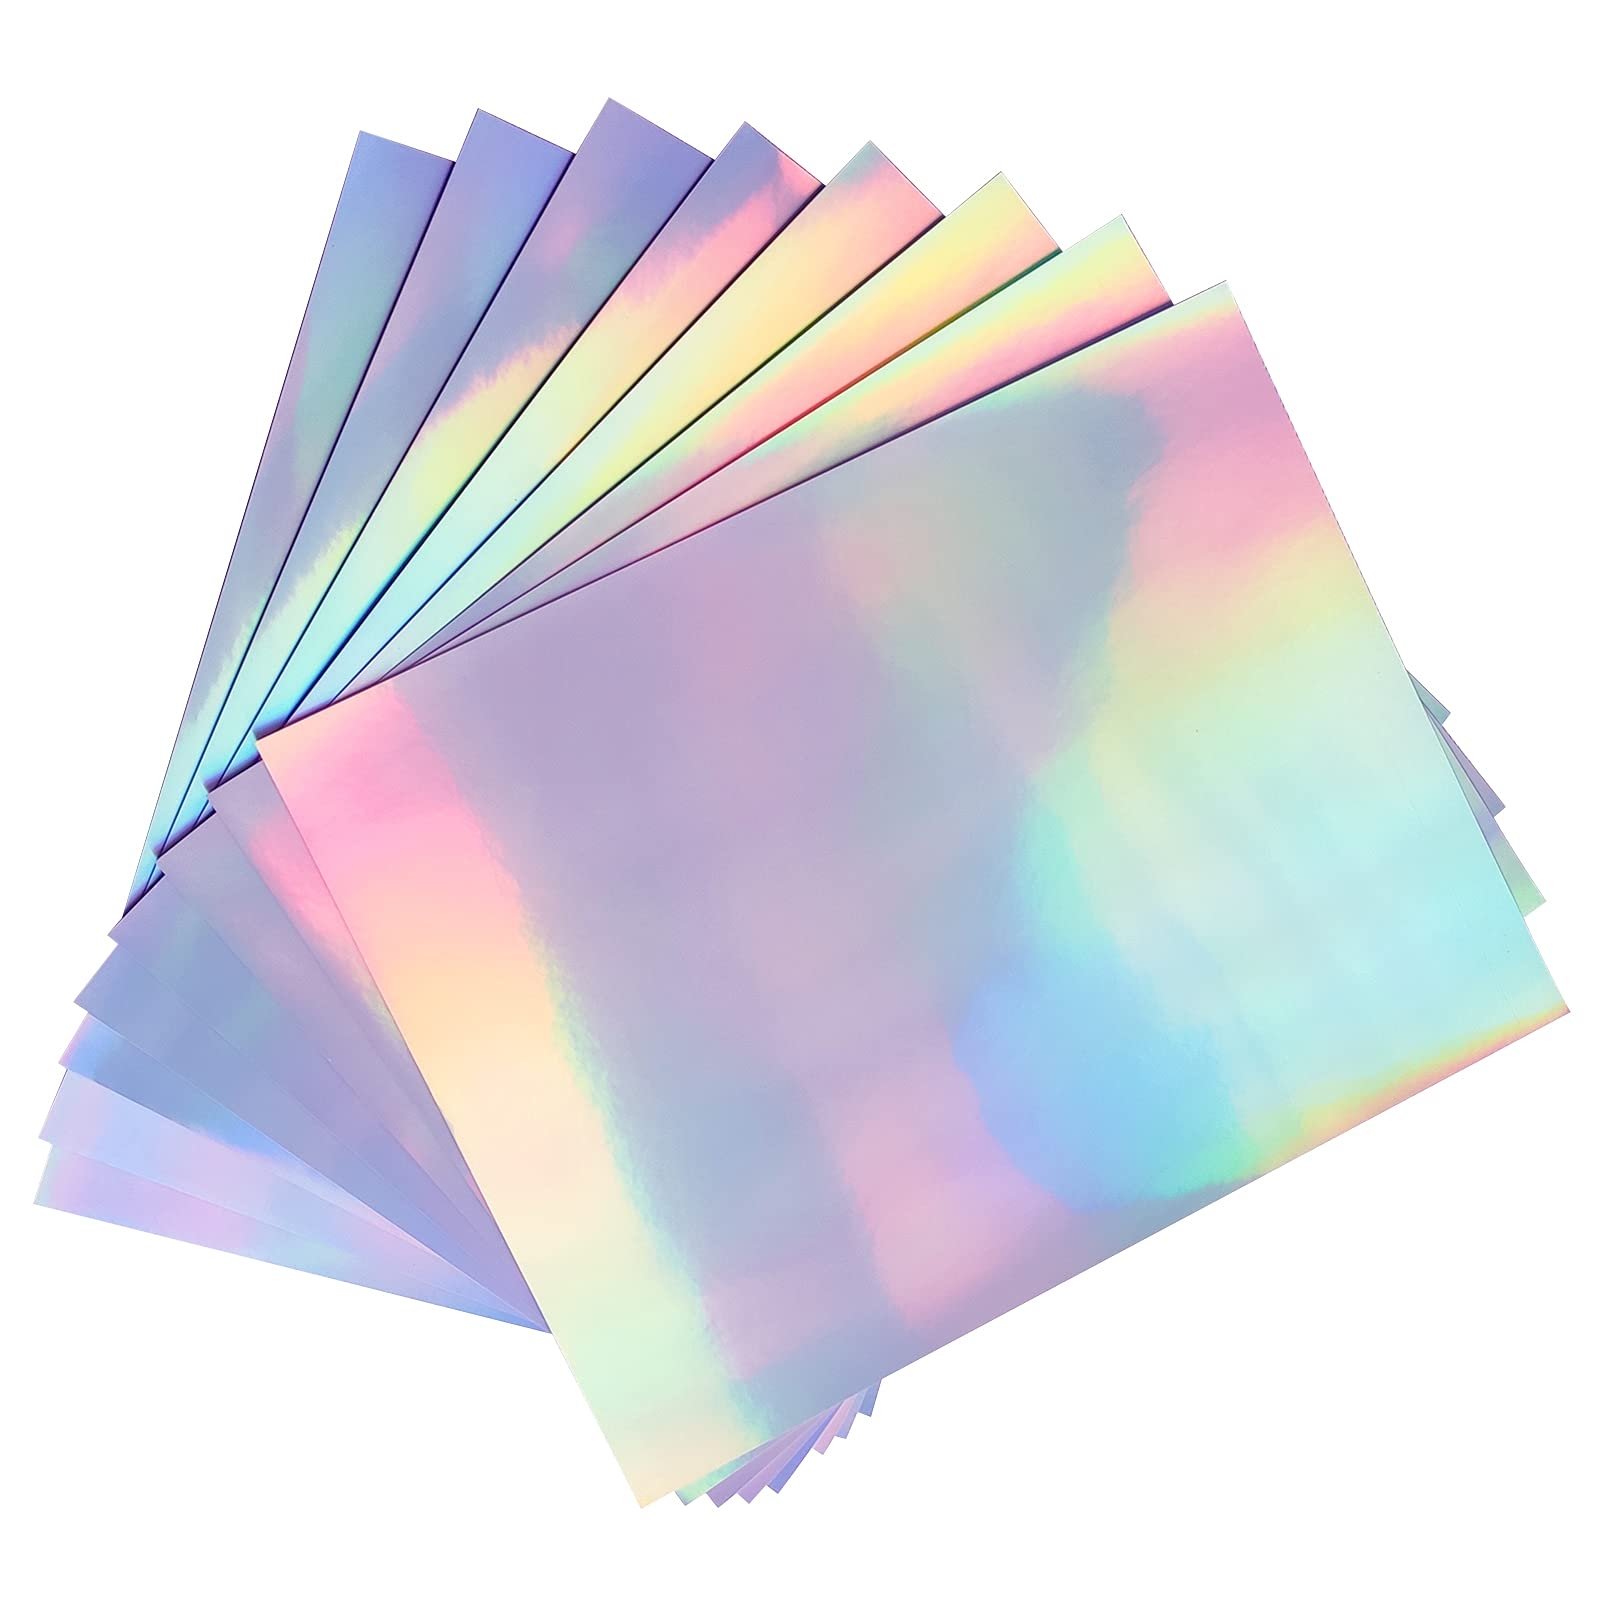 Amazon 50 Sheets Holographic Sticker Paper 8 5 X 11 Inches Vinyl Sticker Paper For Ink Jet Printer Laser Printer Printable Adhesive Waterproof Dries Quickly Sticker Printer Paper Office Products